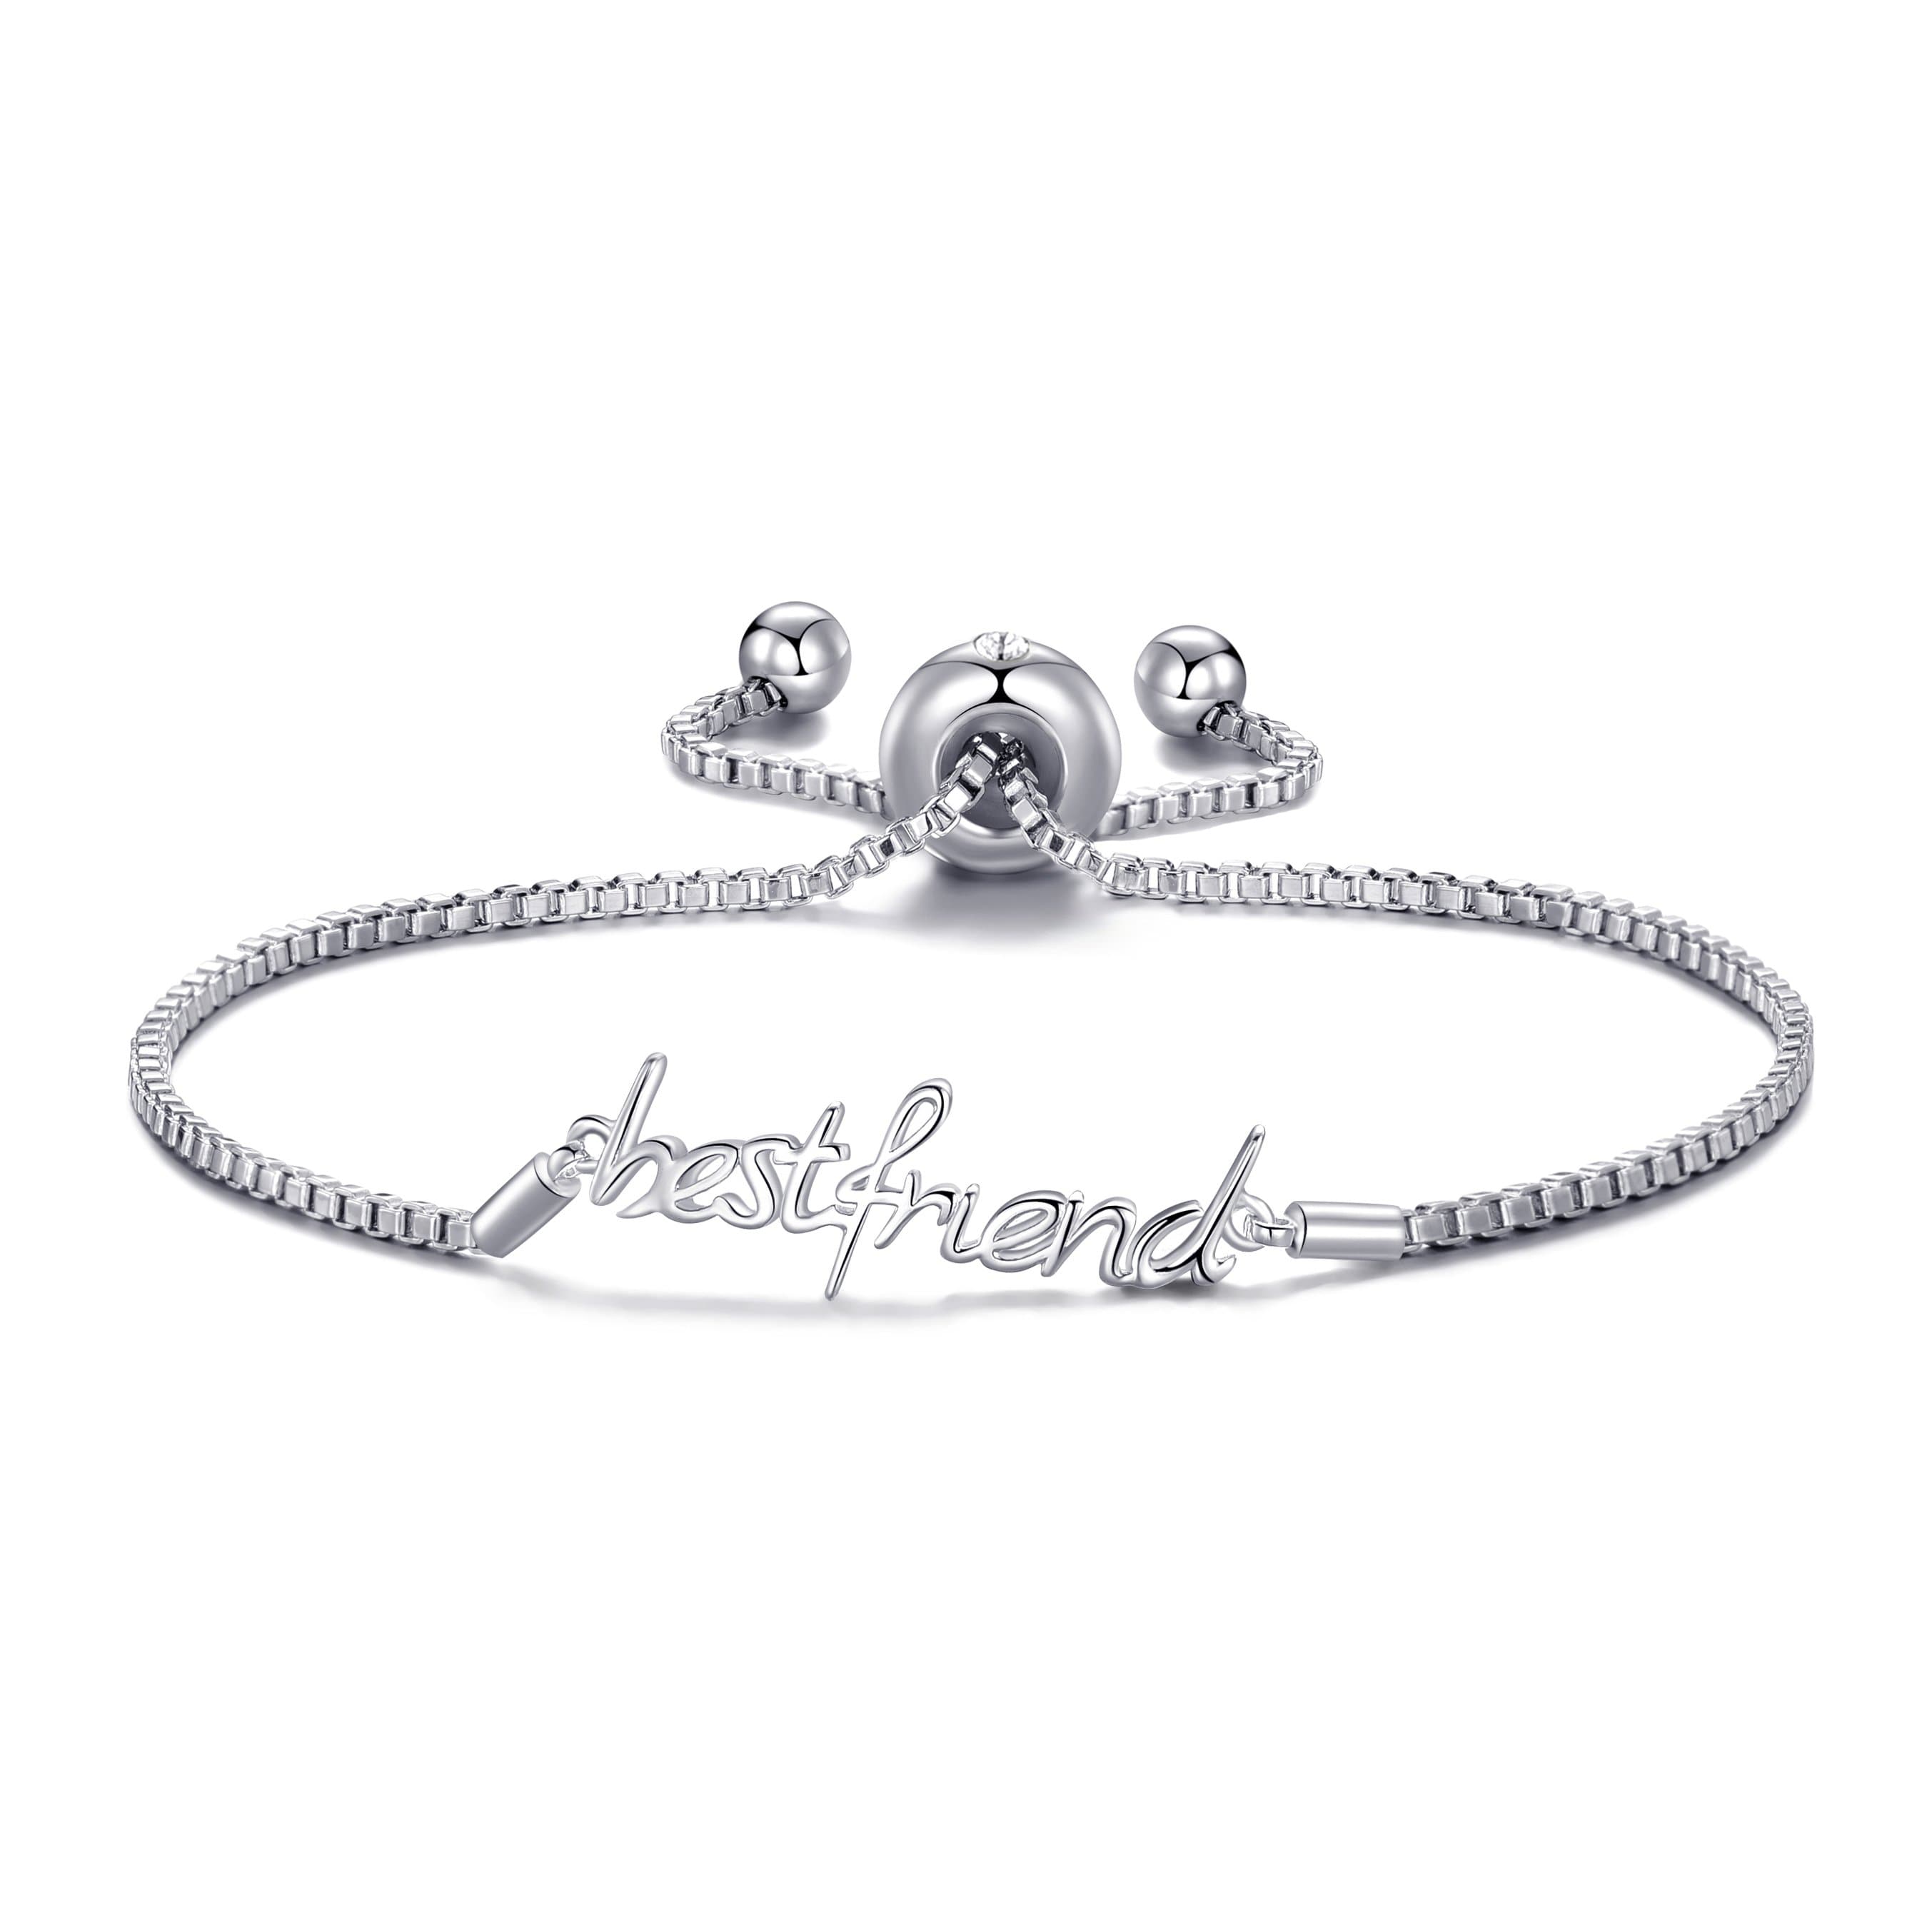 Silver Plated Best Friend Bracelet Created with Zircondia® Crystals by Philip Jones Jewellery